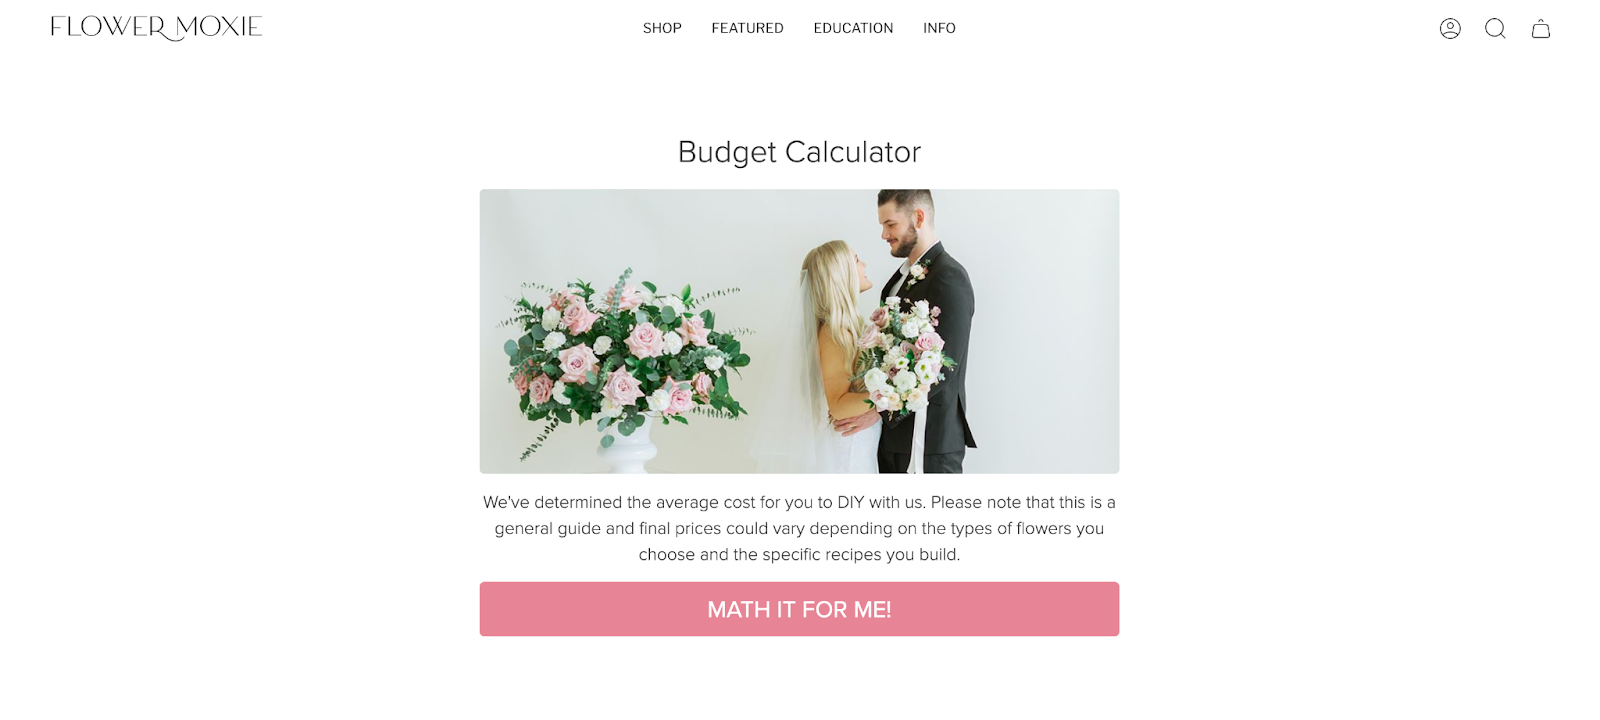 Flower Moxie's budget calculator quiz cover page